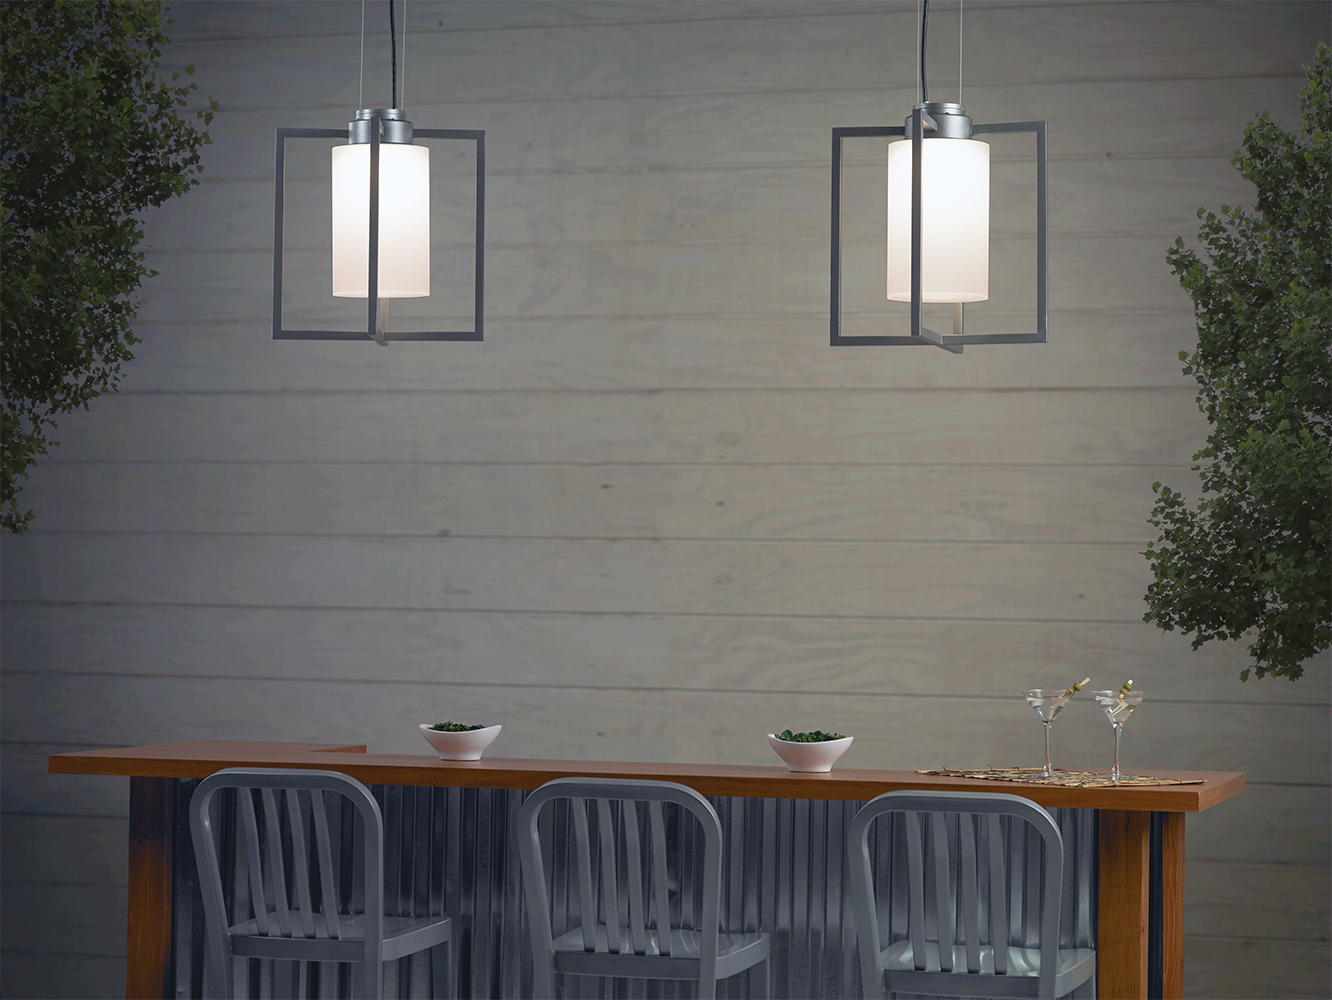 Laterna outdoor light fixtures mounted above an outdoor dining area.